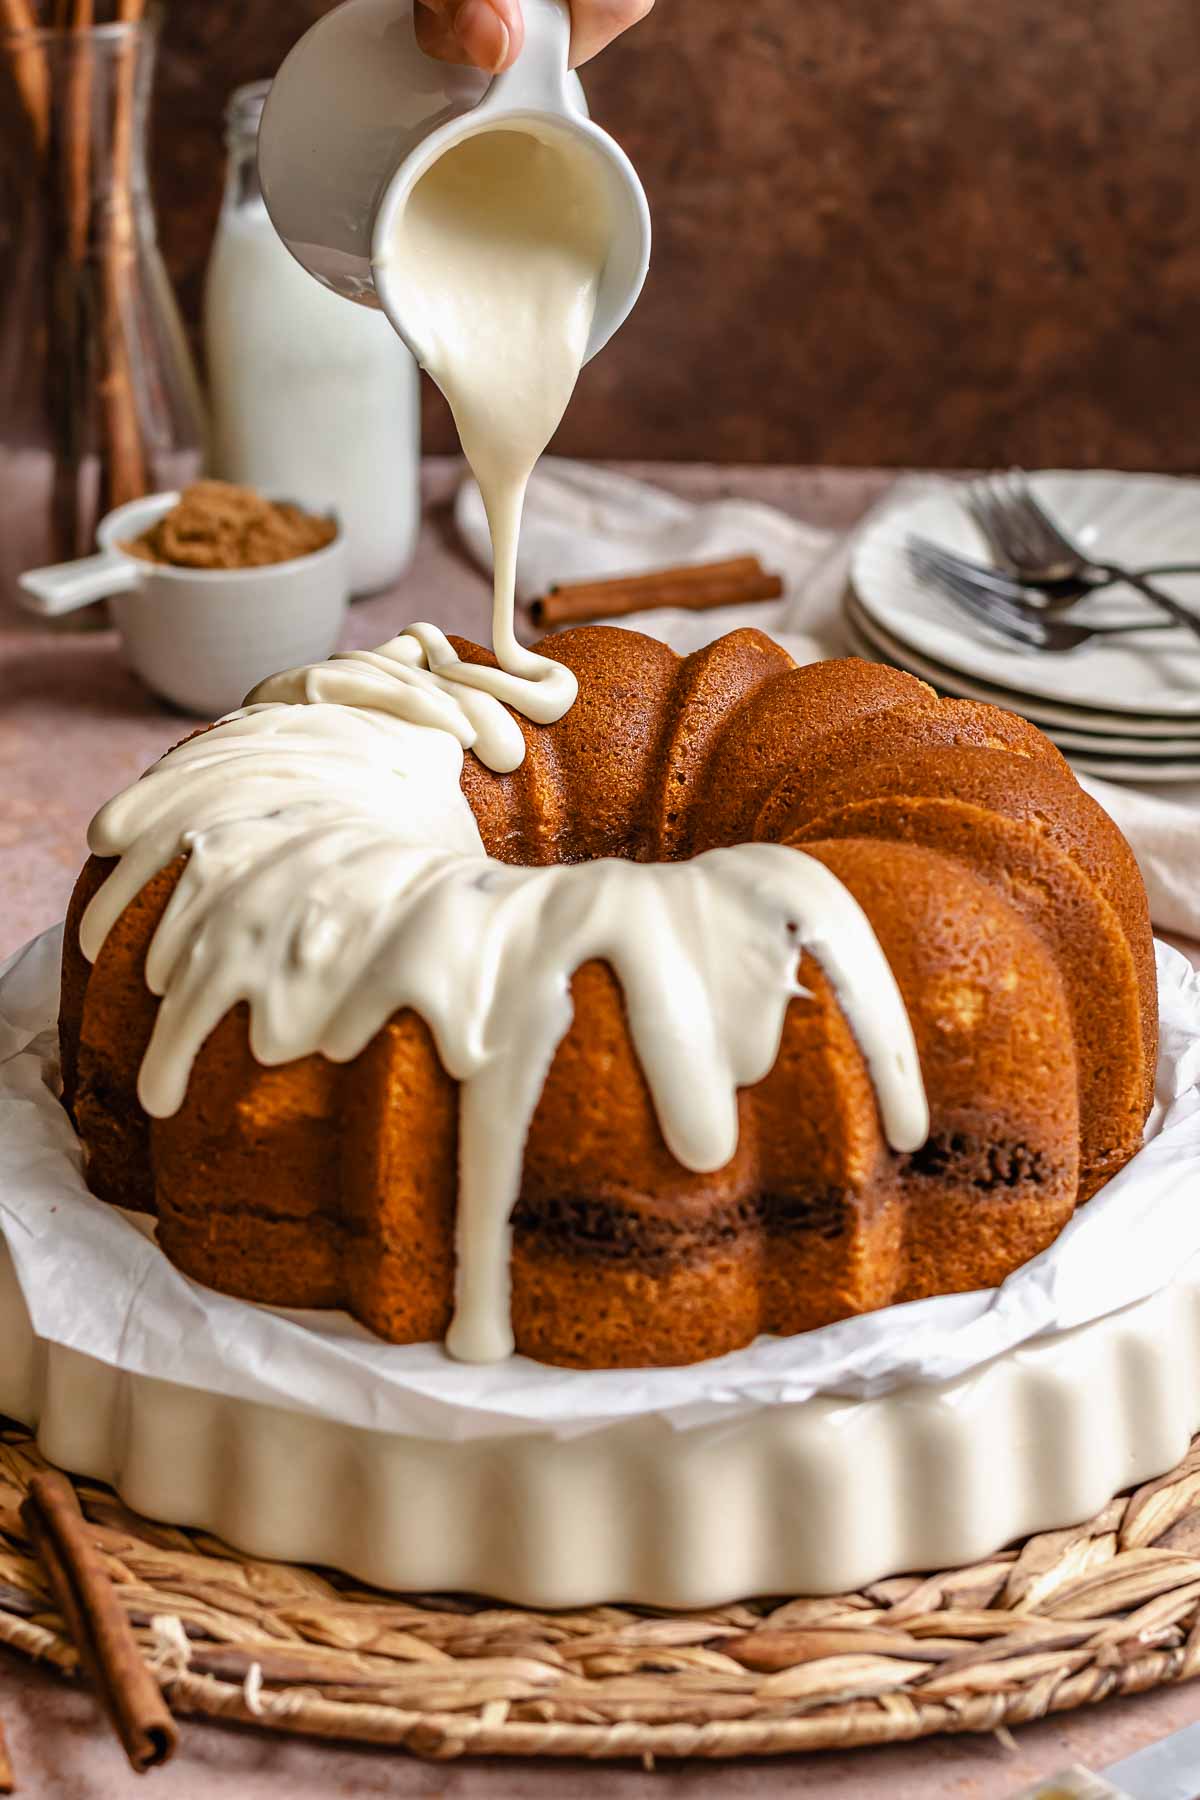 A hand pours cream cheese frosting over a cinnamon bundt cake on a platter.